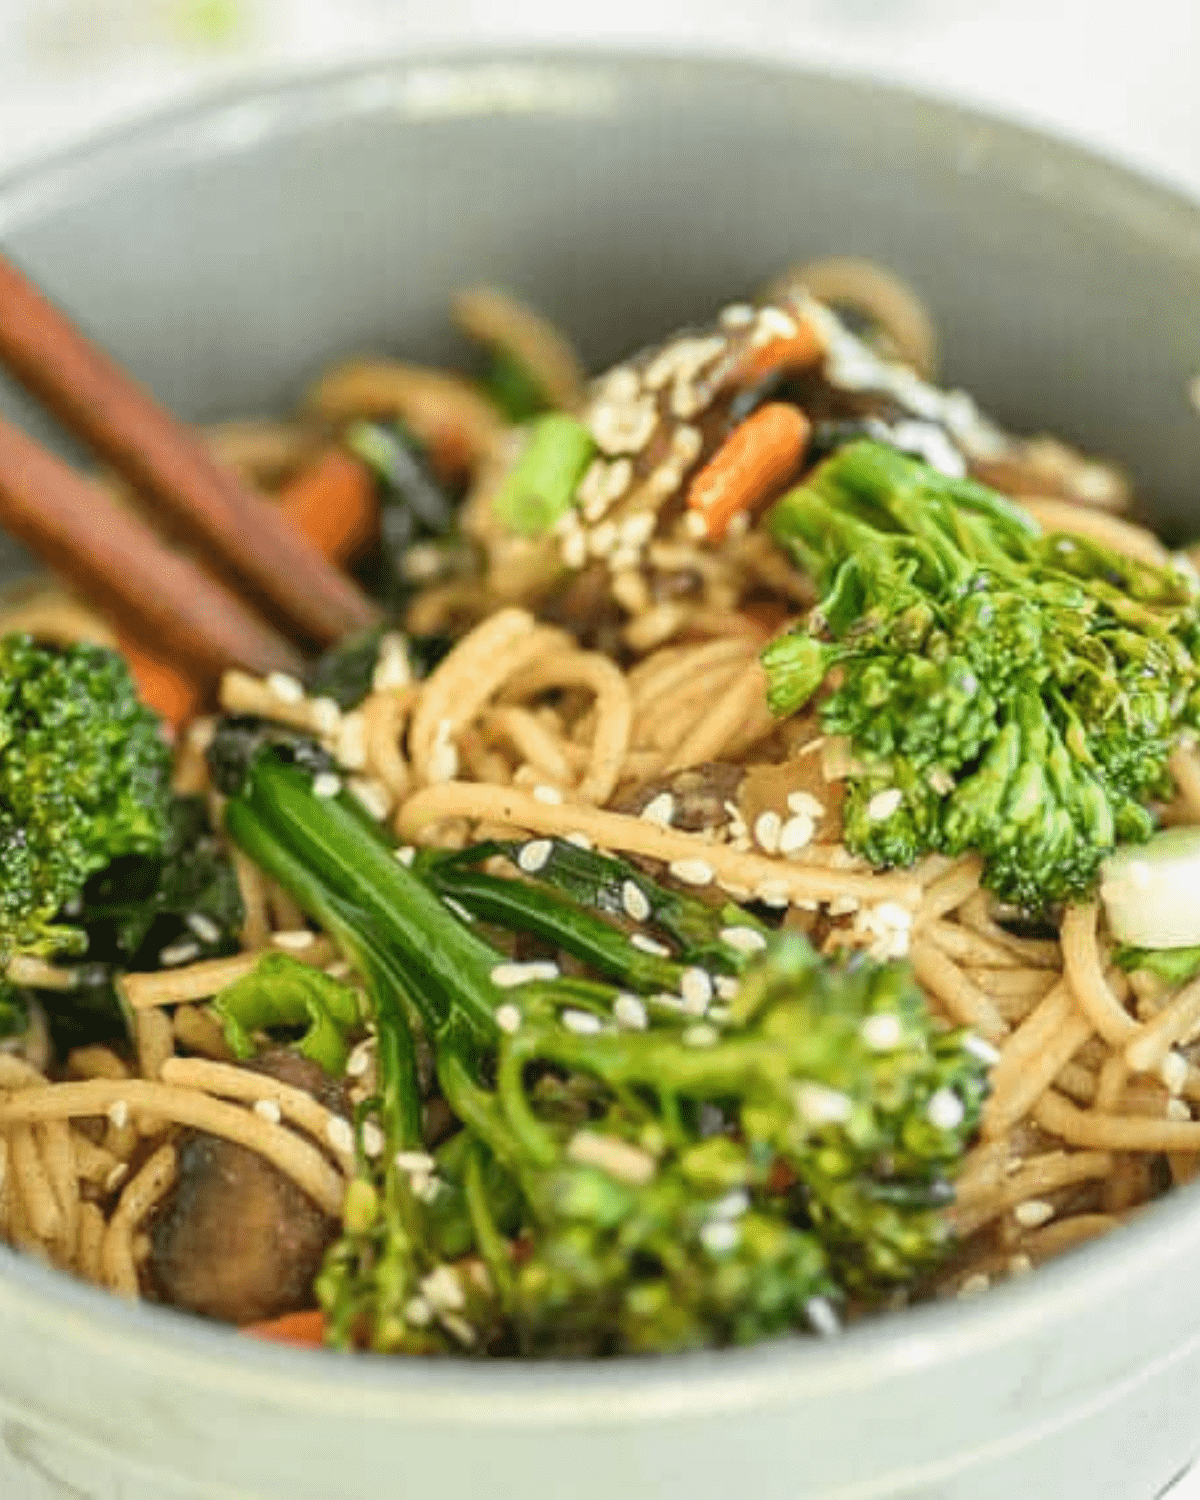 Vegan noodle bowls with broccoli and sesame seeds